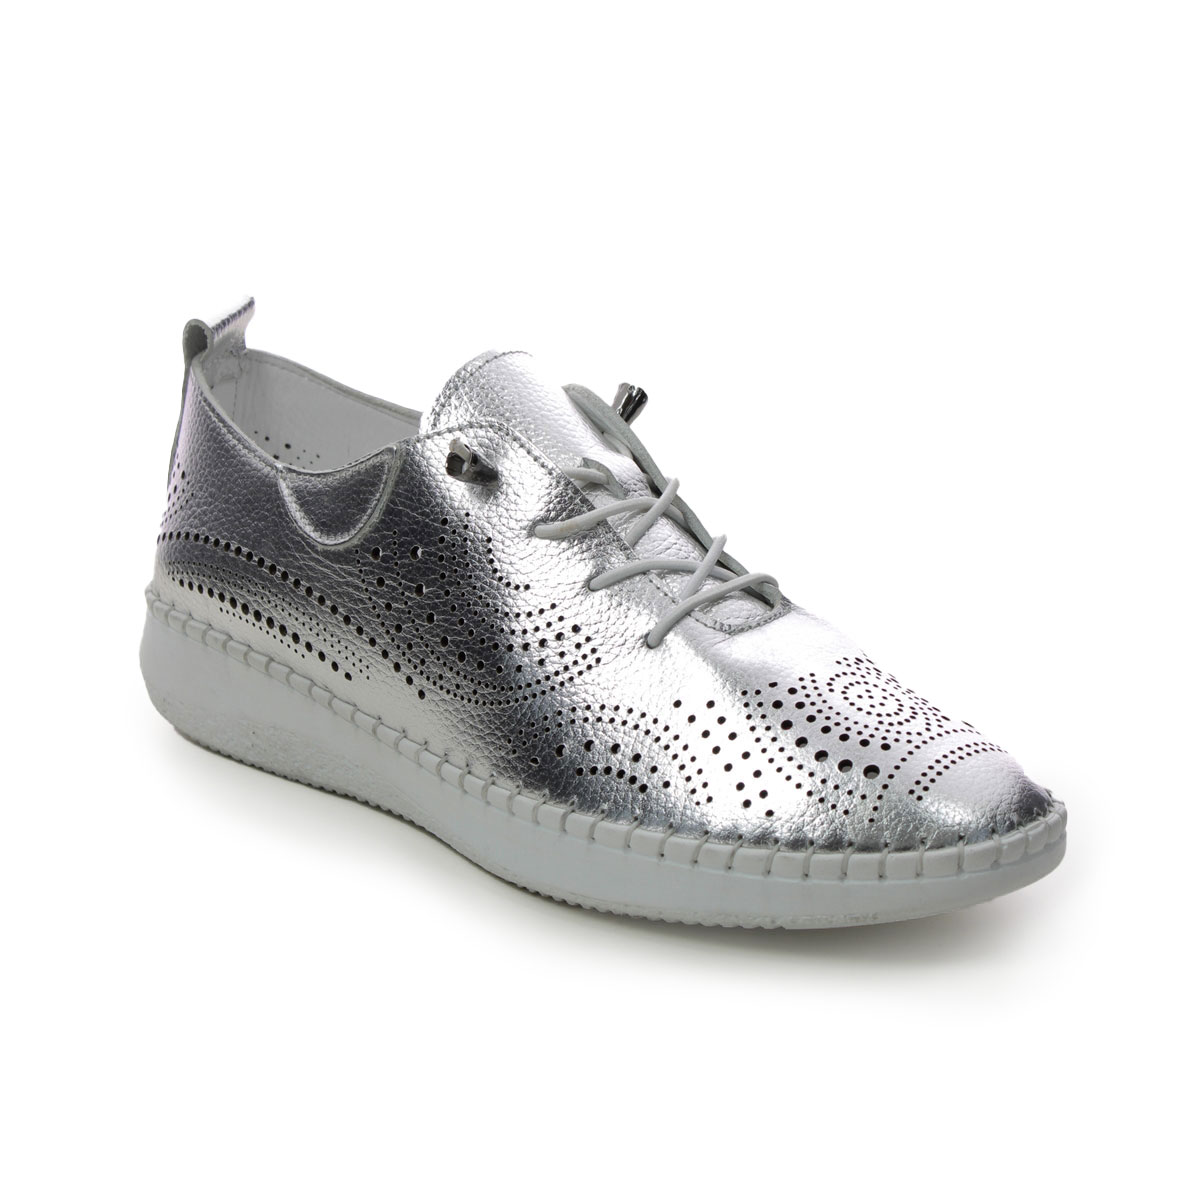 Lotus Katya Silver Womens lacing shoes in a Plain Leather in Size 7